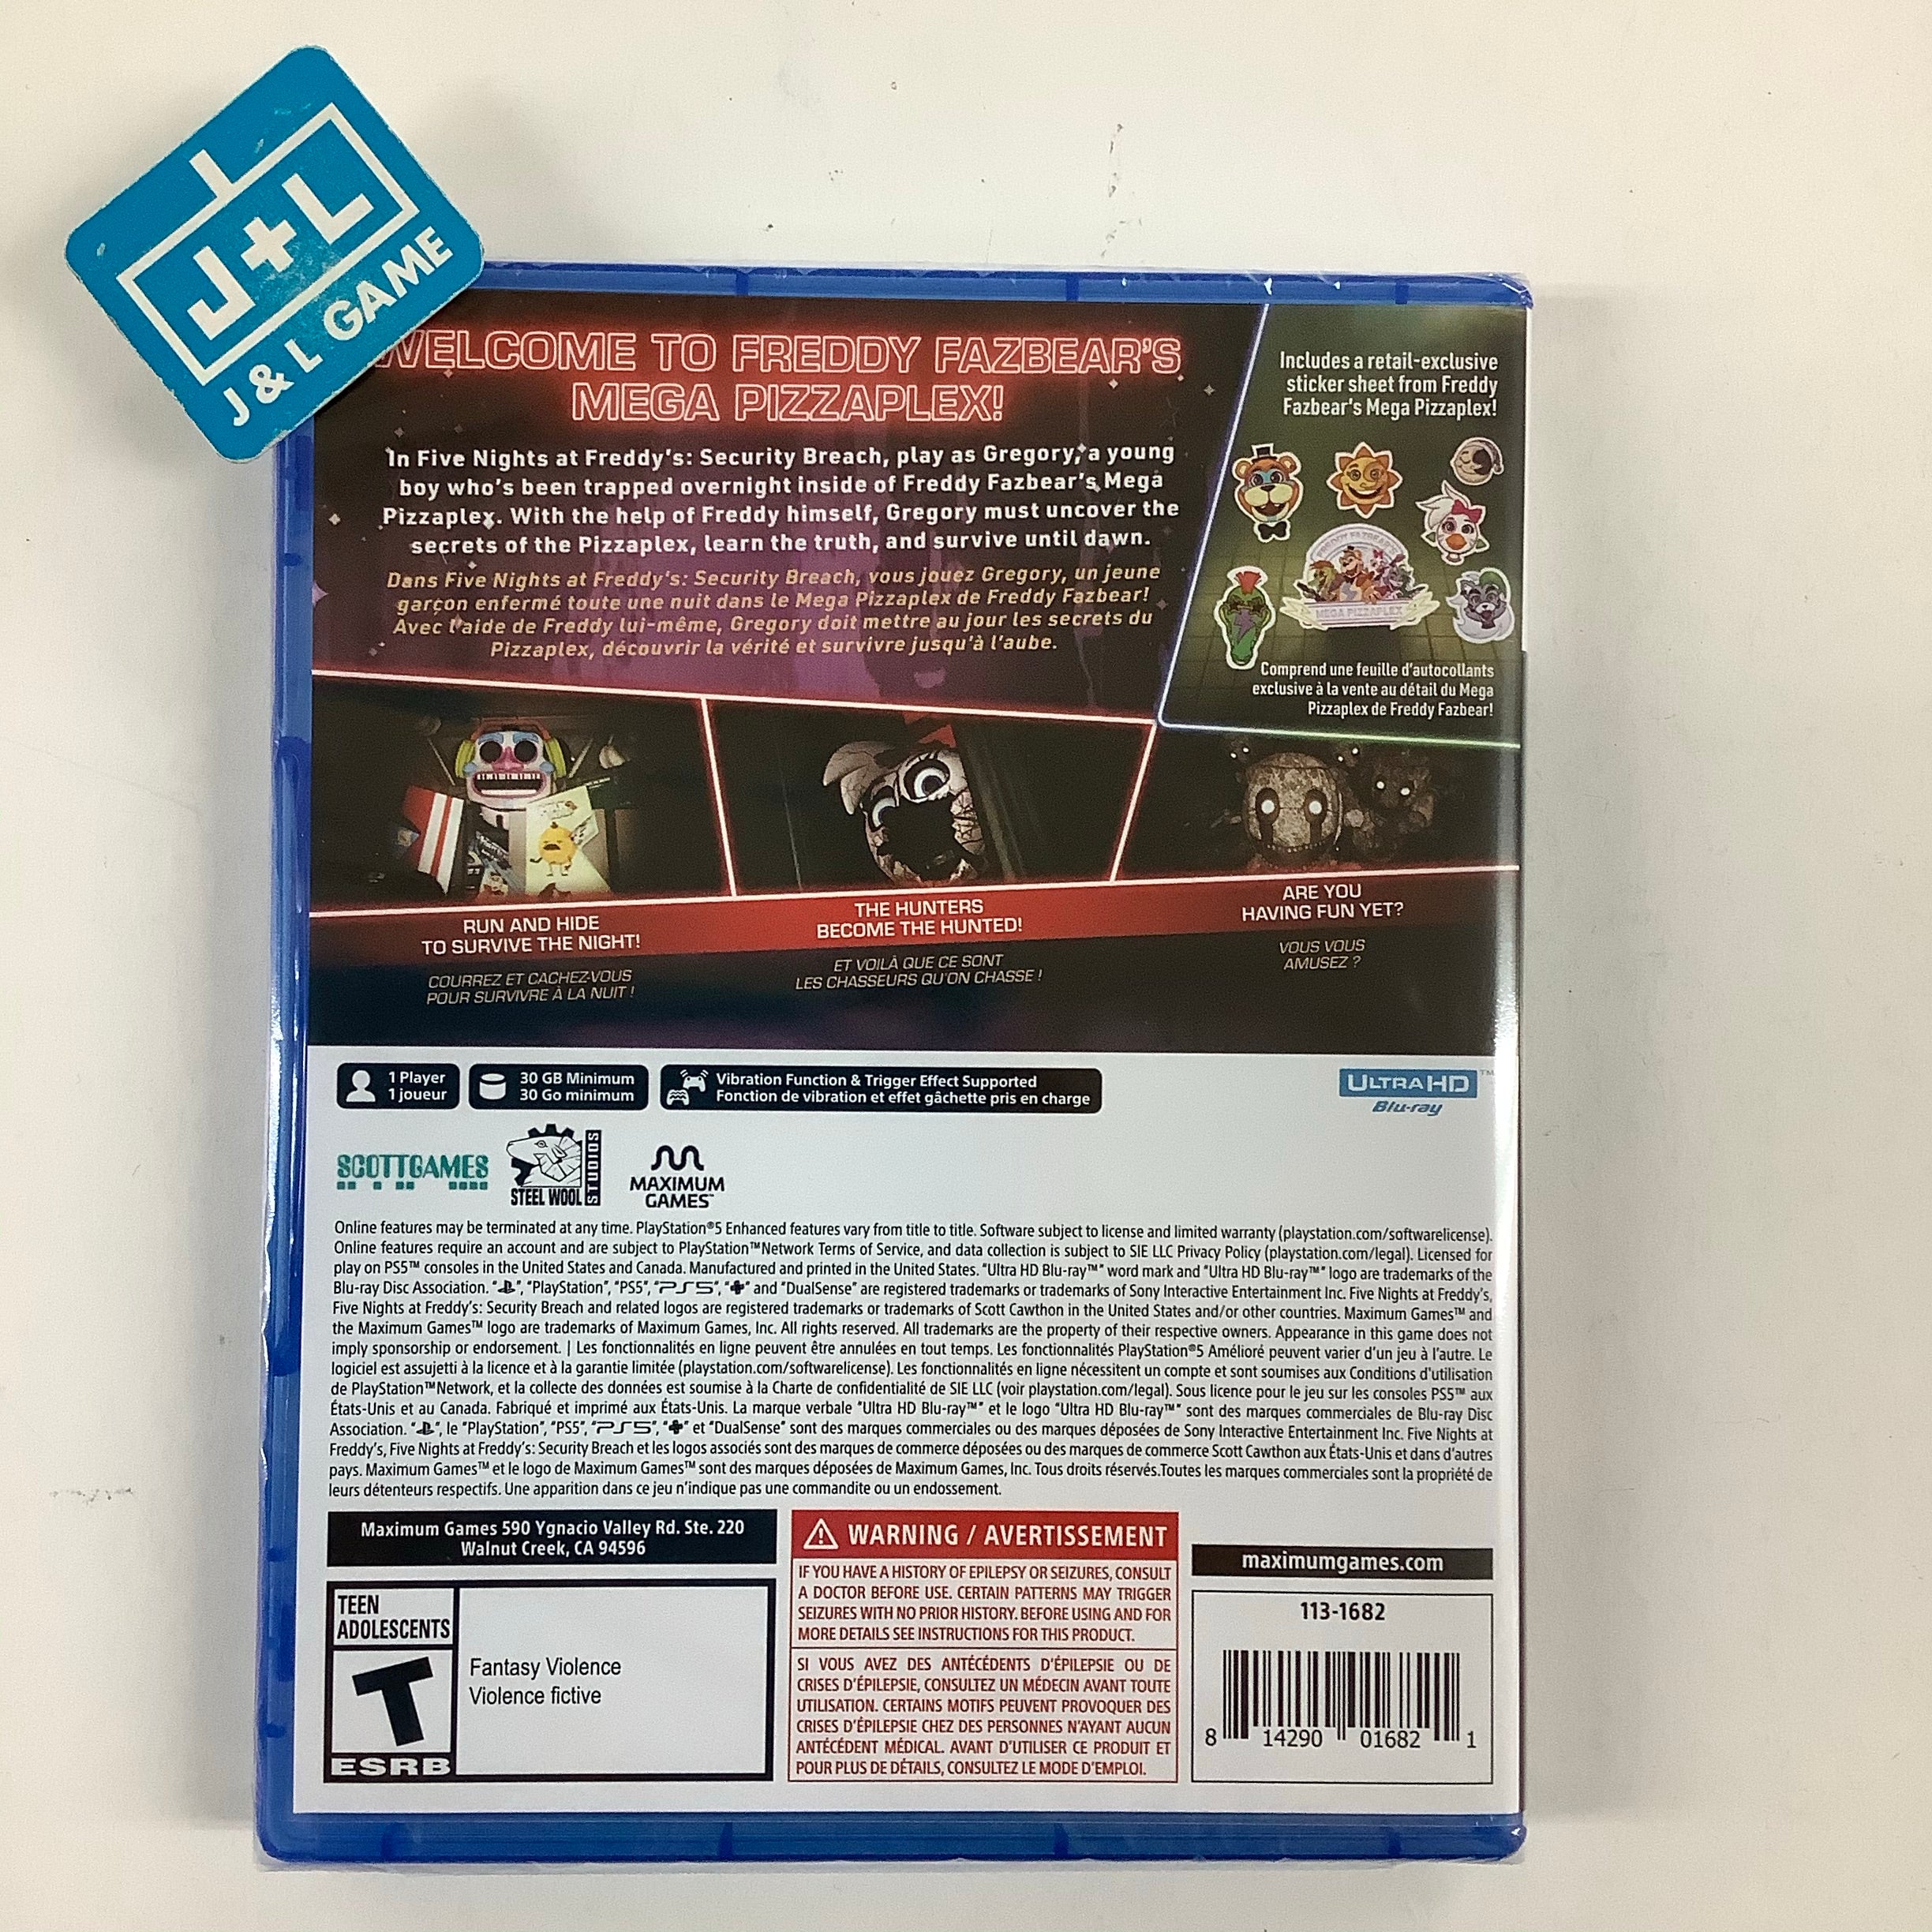 Five Nights at Freddy's: Security Breach - (PS5) PlayStation 5 Video Games Maximum Games   